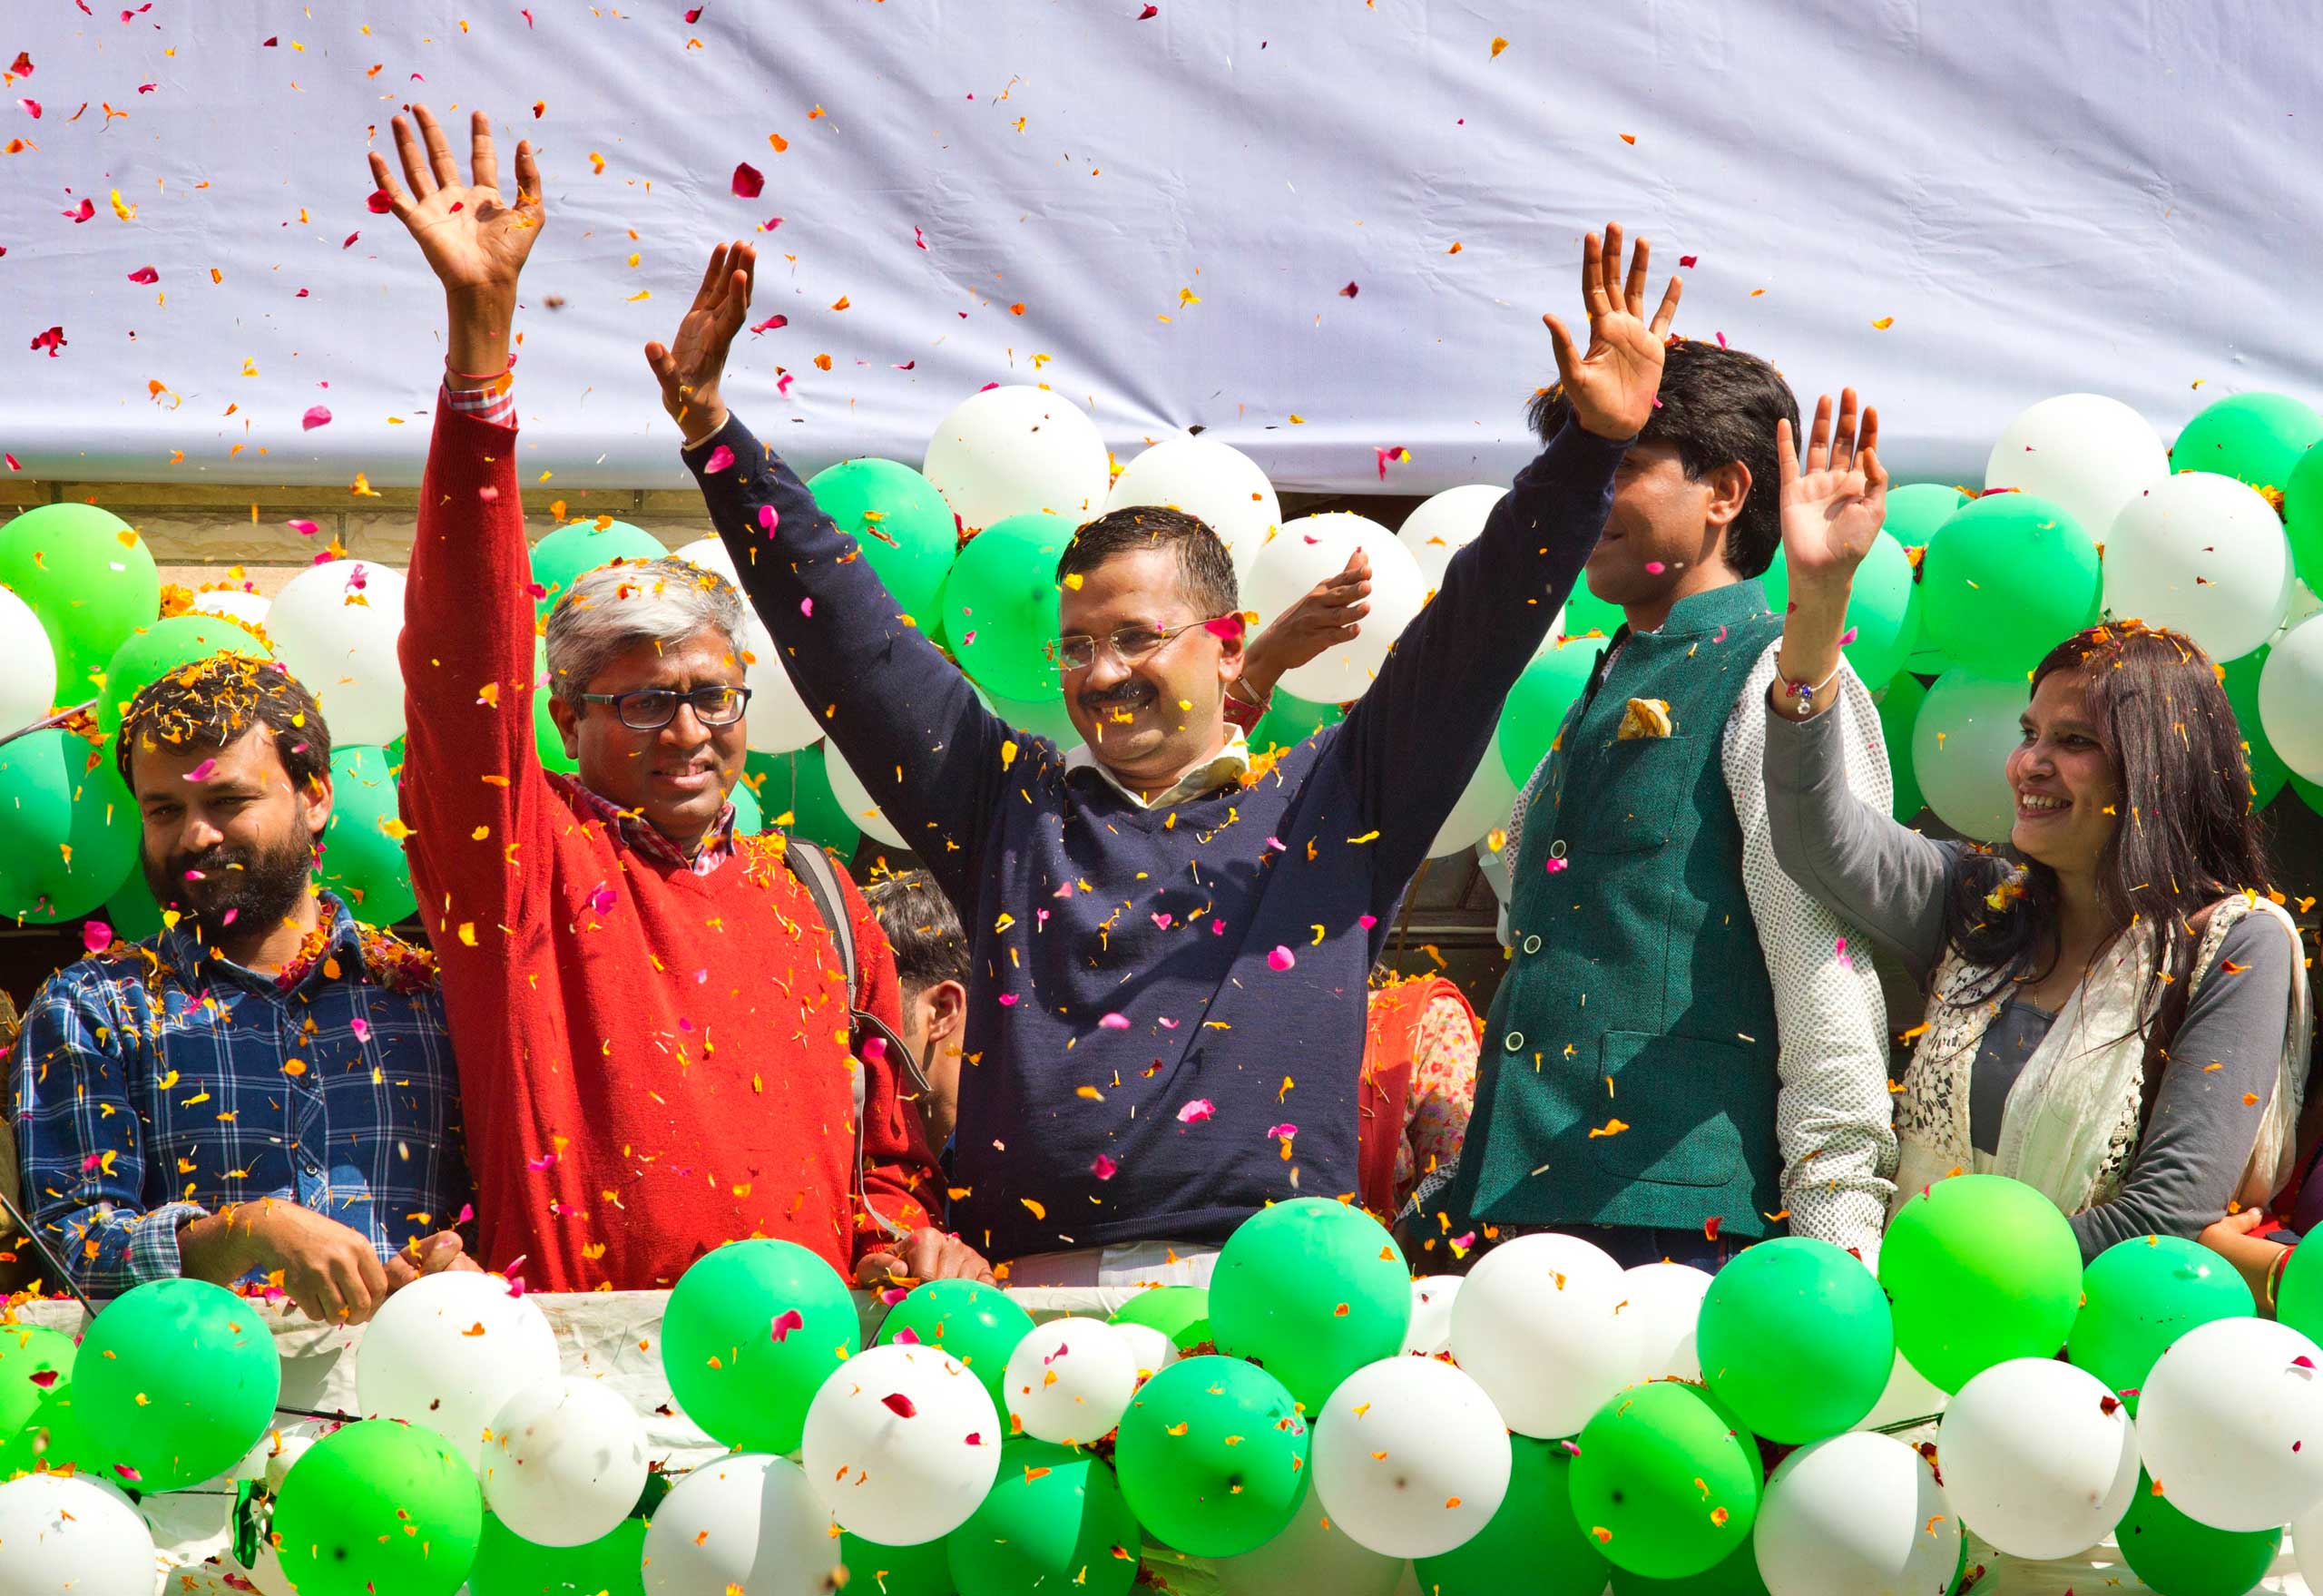 Indian Aam Aadmi Party leader Arvind Kejriwal speaks to supporters as he celebrates victory in the state assembly elections outside the party's headquarters in New Delhi on Feb. 10, 2015. (Manish Swarup—AP)